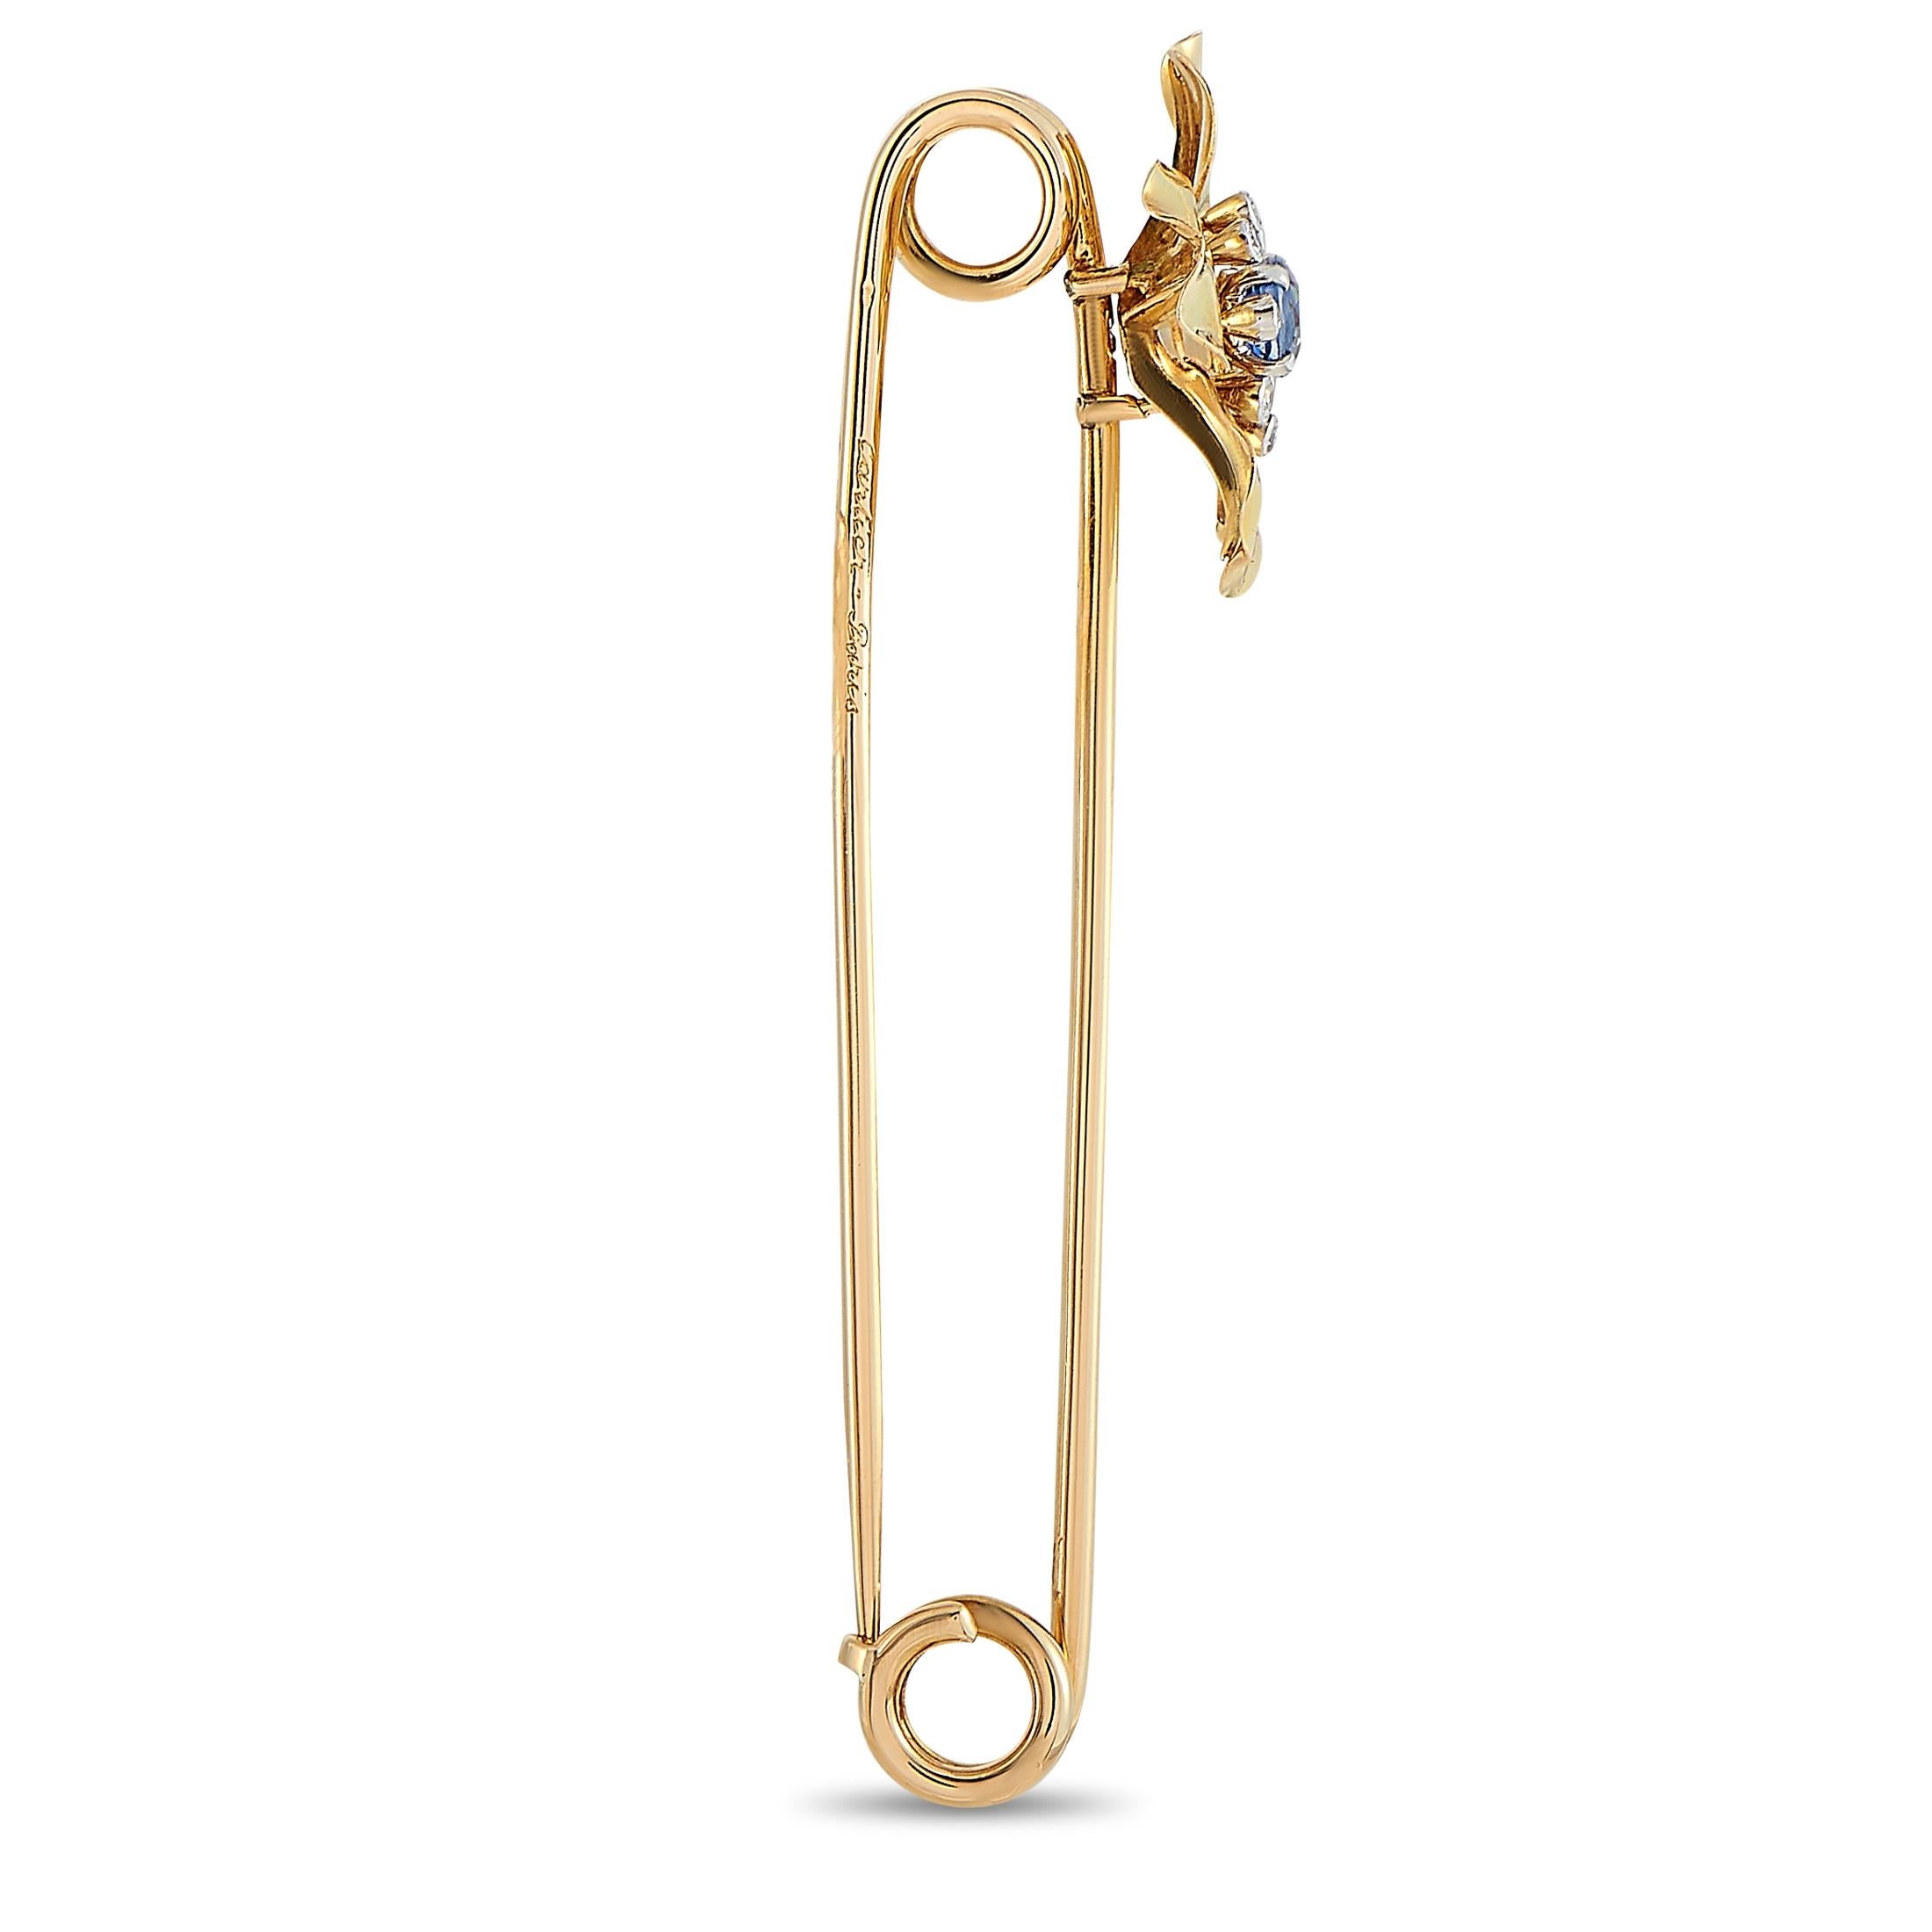 This vintage Cartier safety pin is made of 18K yellow gold and boasts a flower motif embellished with diamonds and a sapphire. The pin weighs 10.3 grams and measures 2.88” in length and 1” in width.
 
 Offered in estate condition, this item includes